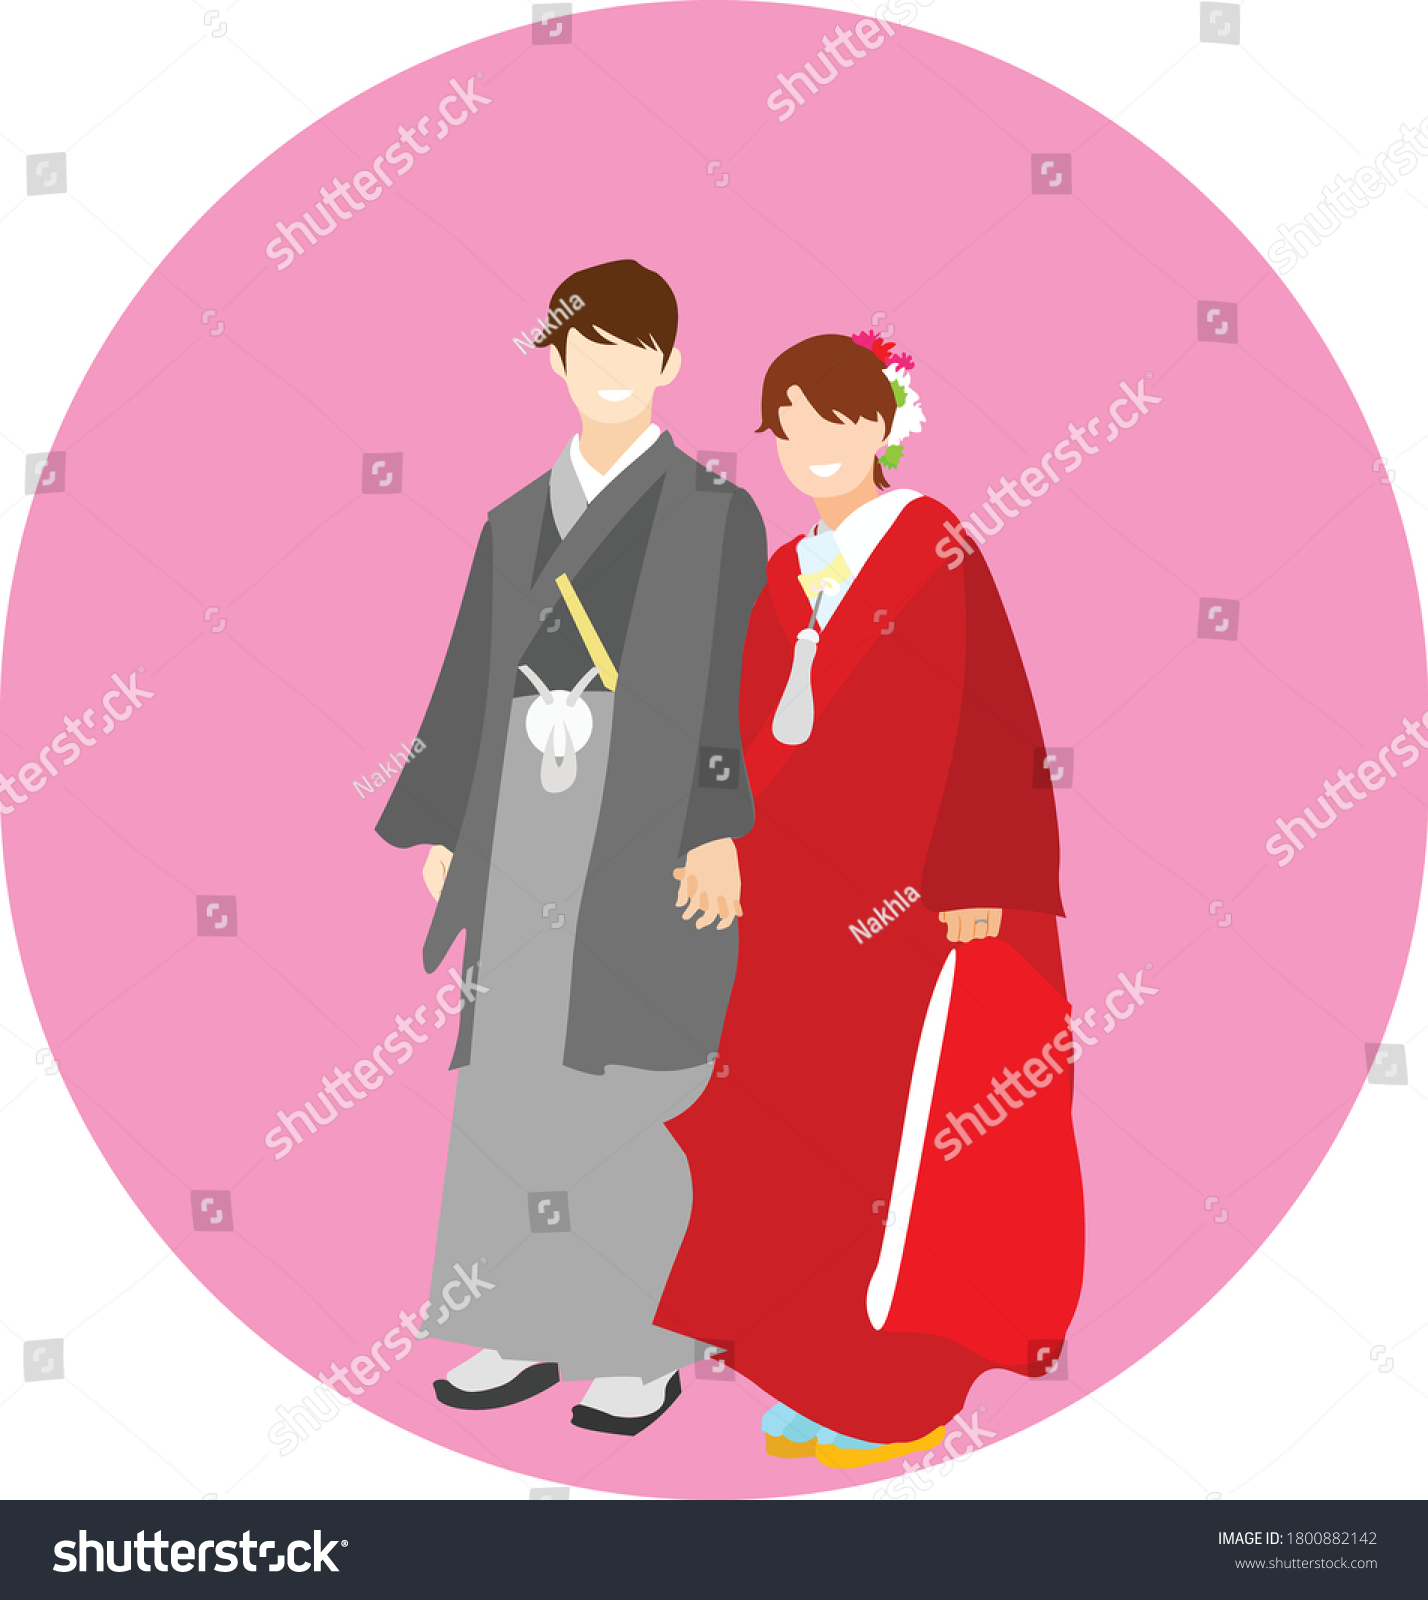 japanese love couple flat image - Royalty Free Stock Vector 1800882142 ...